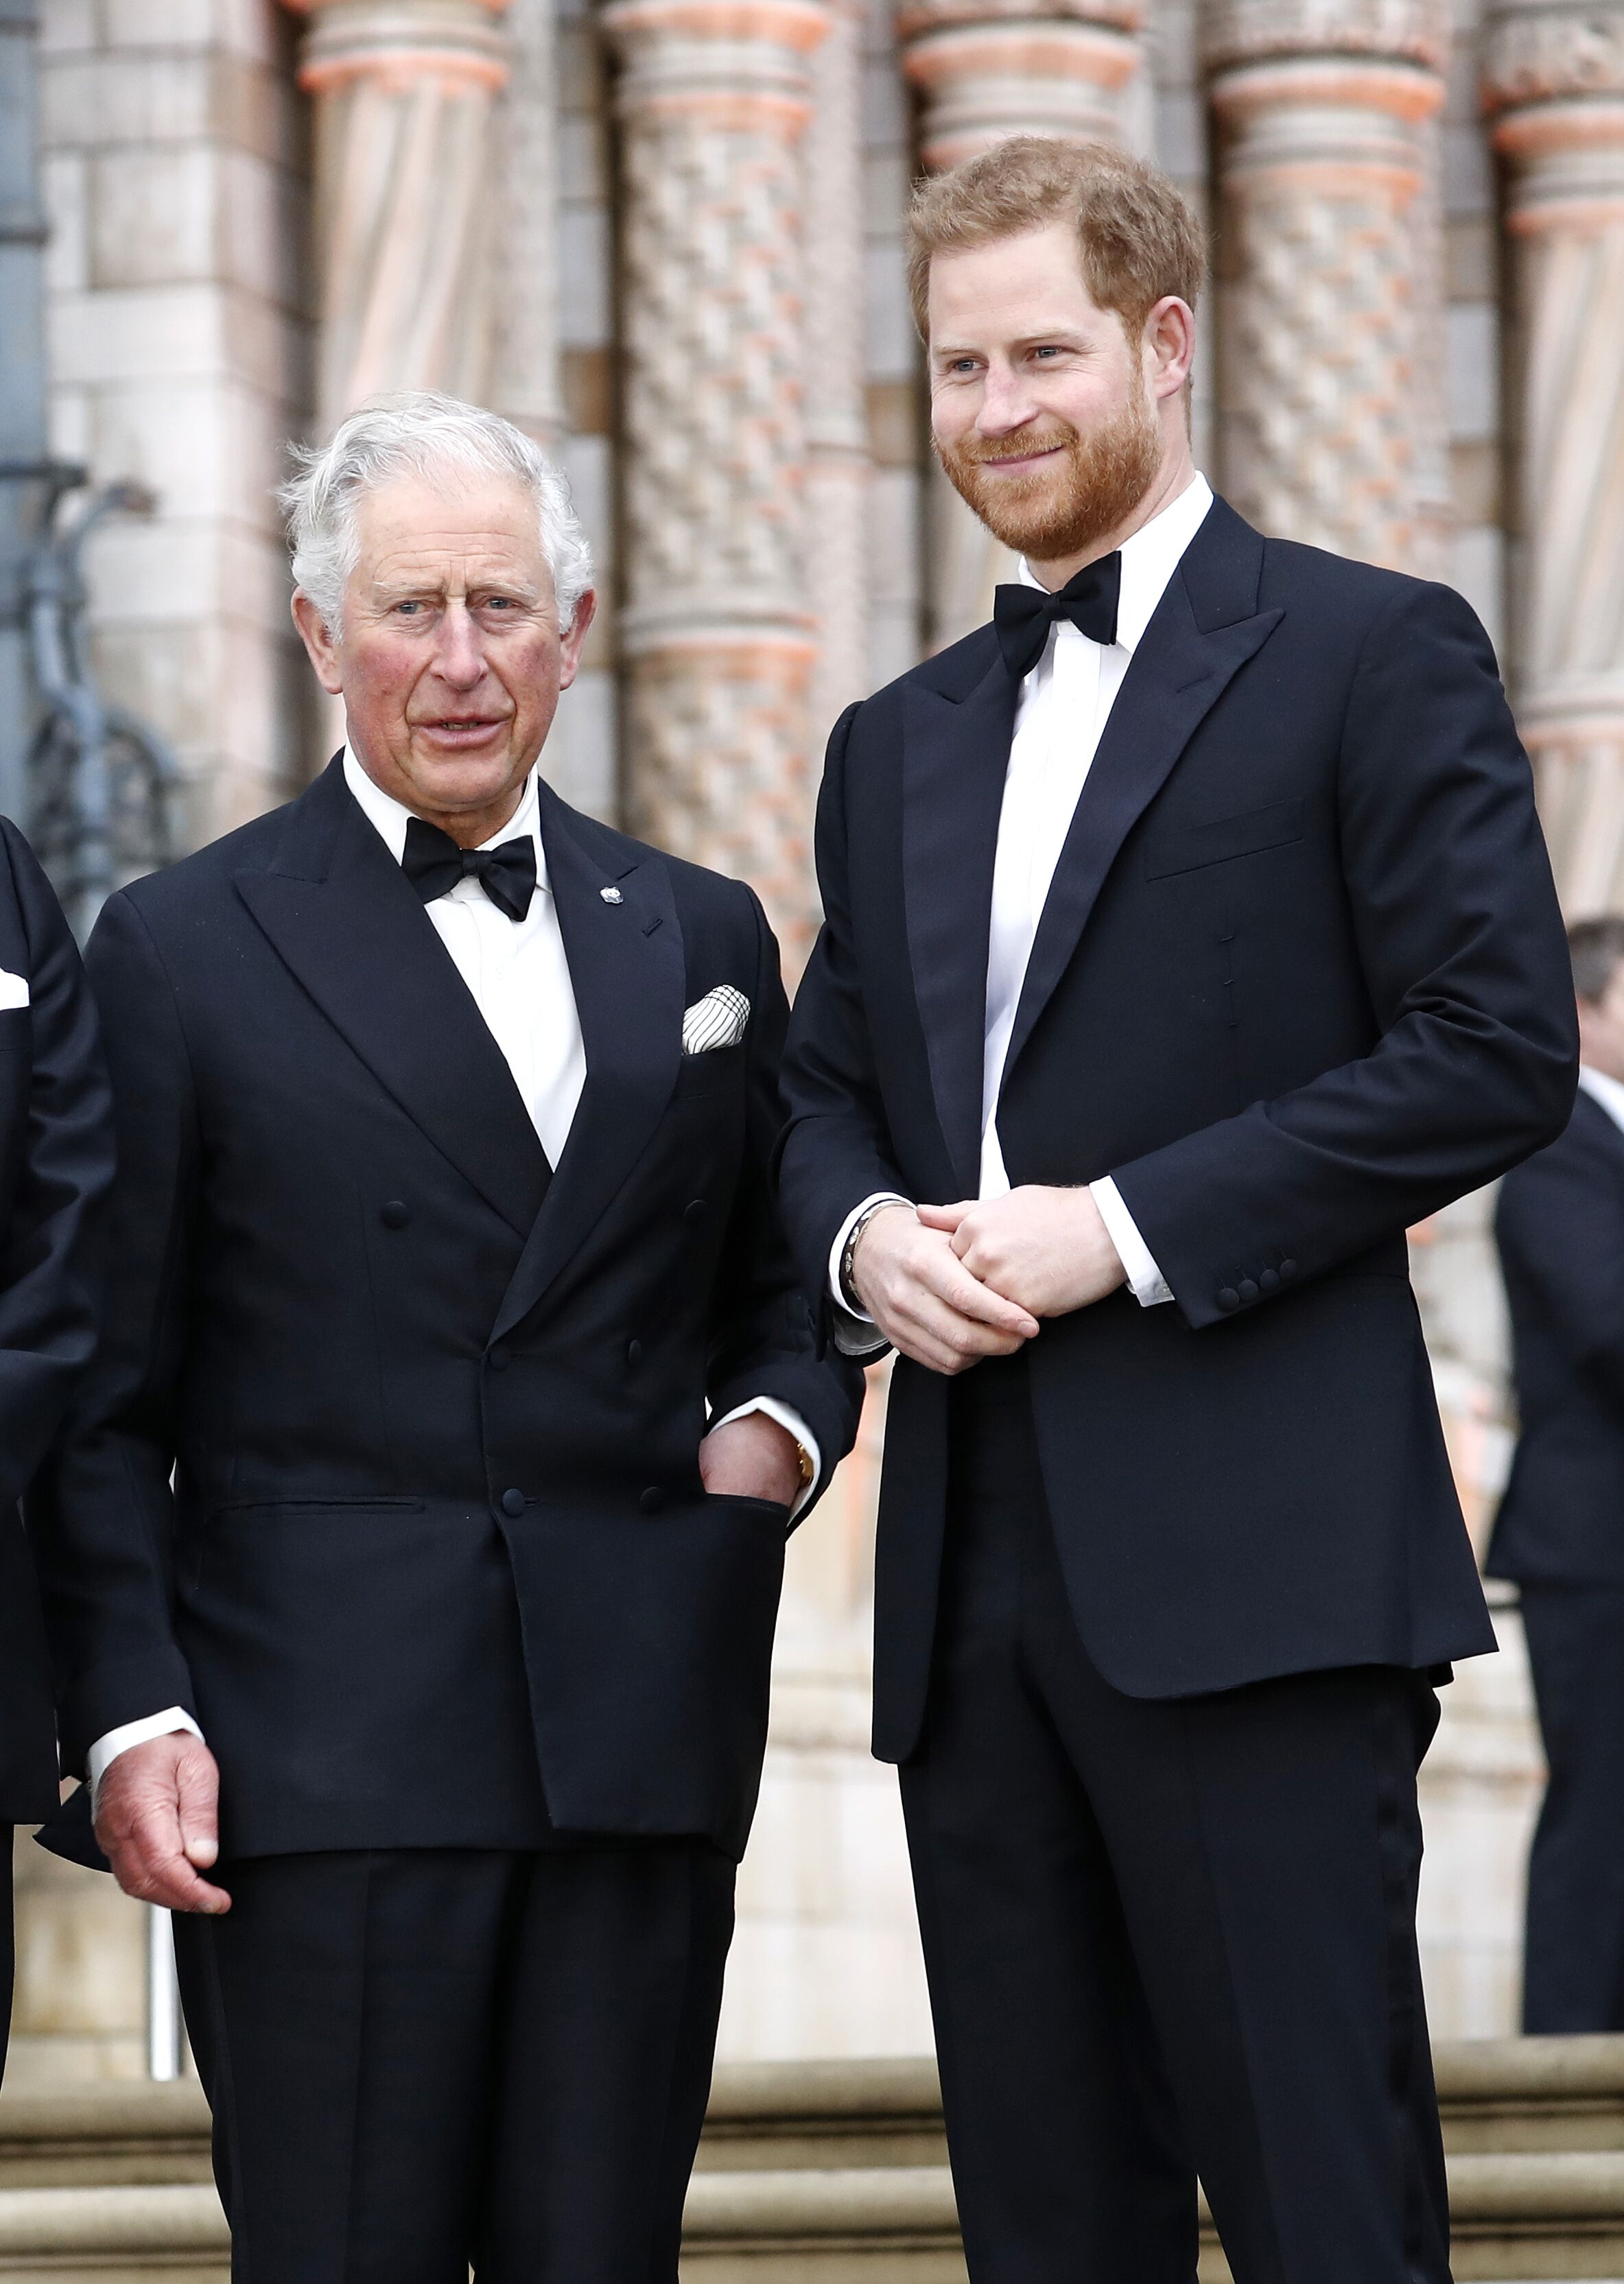 Prince Charles, Prince of Wales and Prince Harry, Duke of Sussex attend the "Our Planet" global premiere the at the Natural History Museum on April 04, 2019 in London, England. | Source: Getty Images